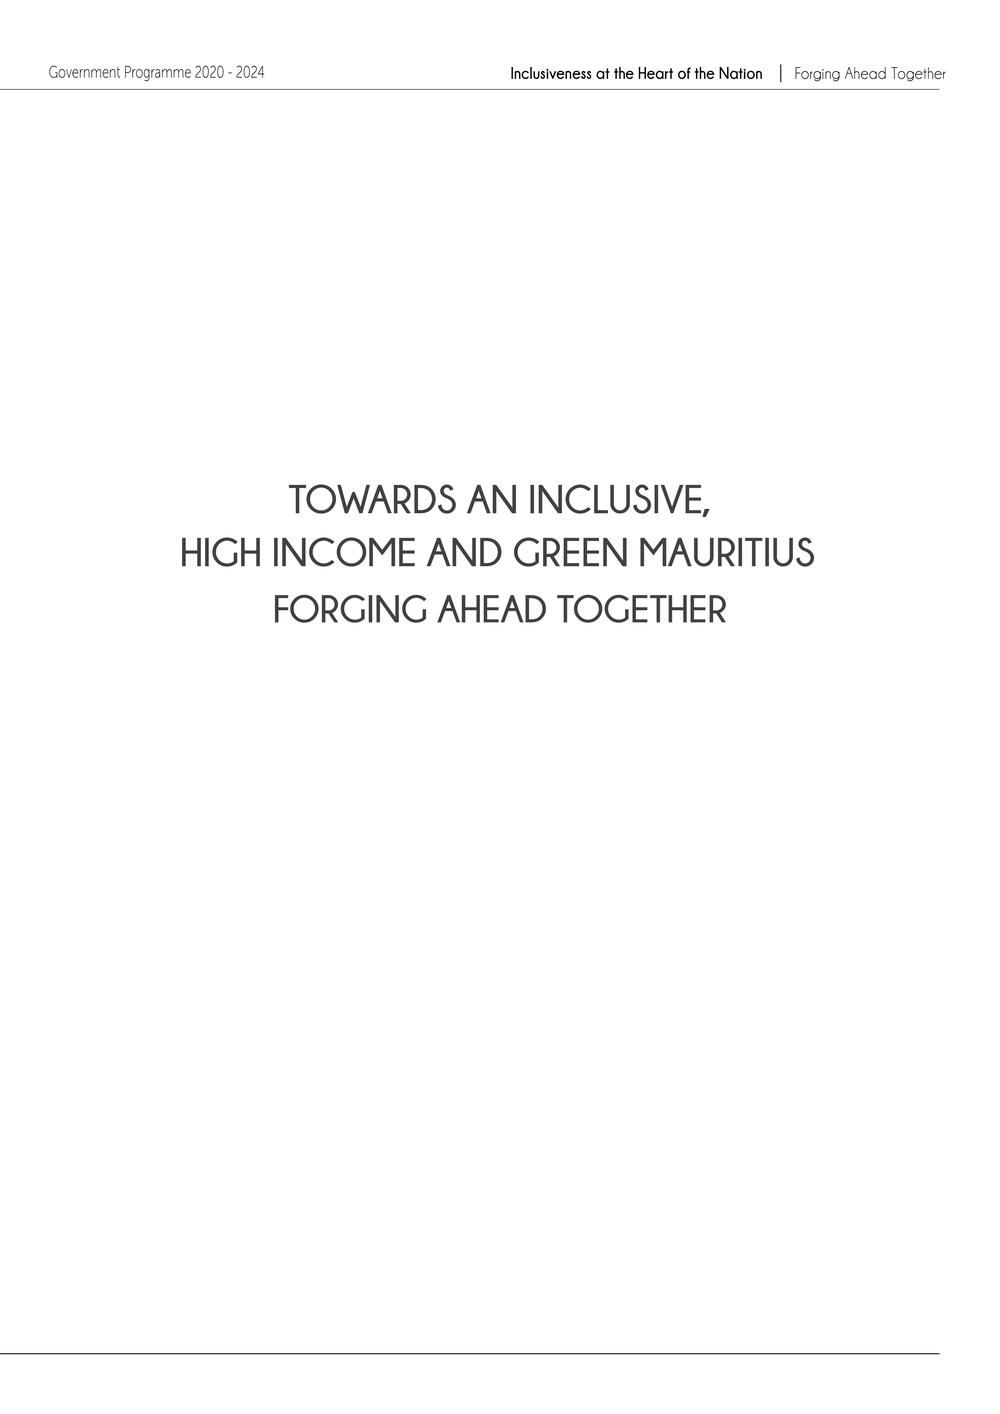 Government Programme 2020-2024:Towards an inclusive, high income and green Mauritius - Forging ahead together